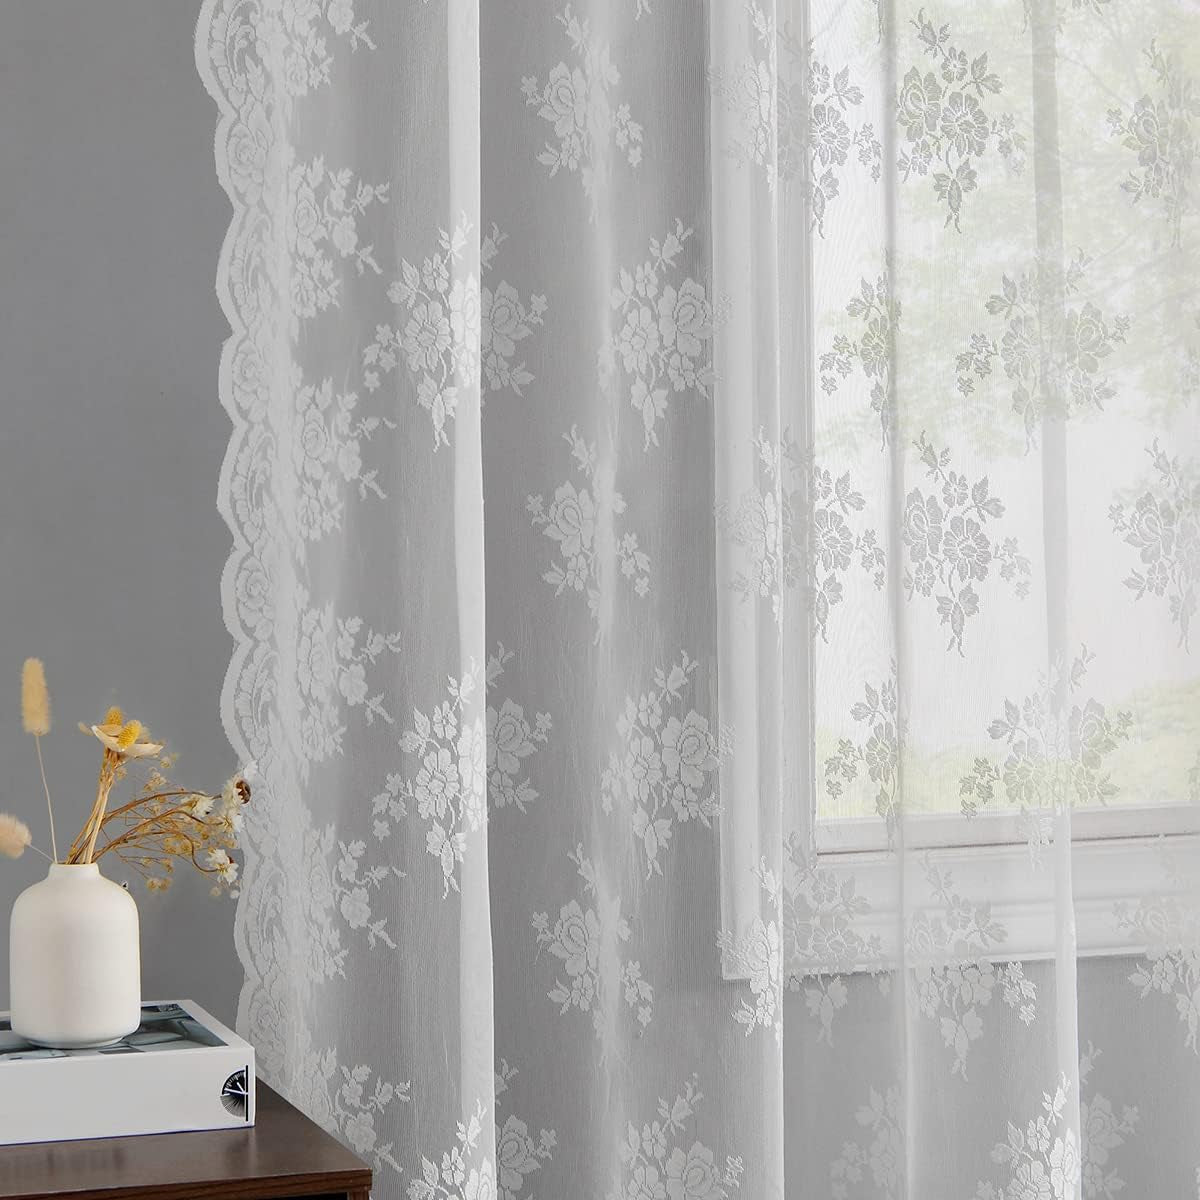 Kotile Sage Green Sheer Valance Curtain for Windows, Rustic Floral Spring Sheer Window Valance Curtain 18 Inch Length, Light Filtering Rod Pocket Lace Valance, 52 X 18 Inch, 1 Panel, Sage Green  Kotile Textile White 52 In X 95 In Grommet 